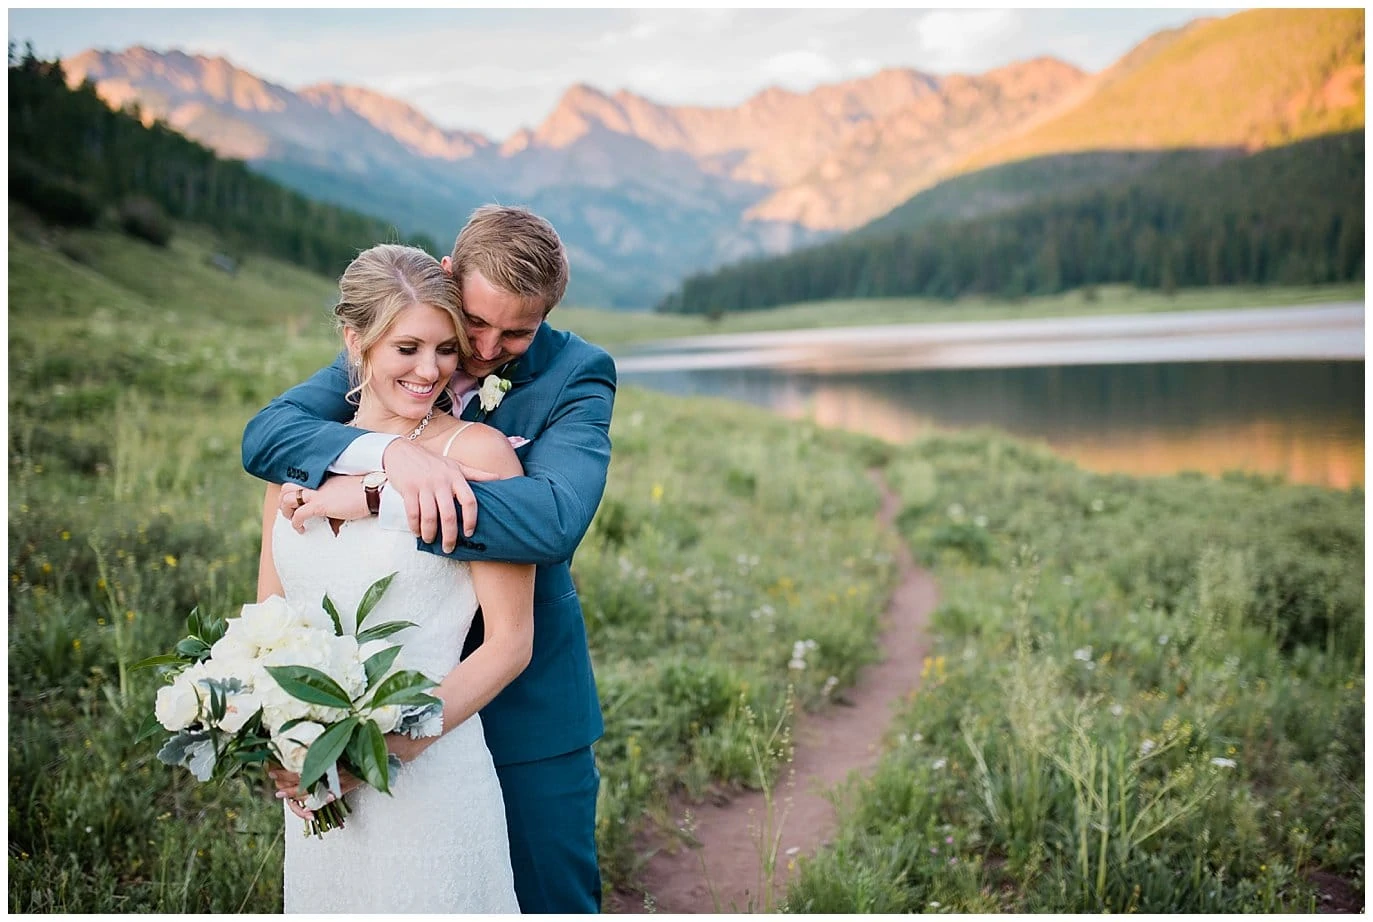 romantic sunset photos with alpenglow at Piney River Ranch Summer Wedding by Piney River Ranch wedding photographer Jennie Crate photographer